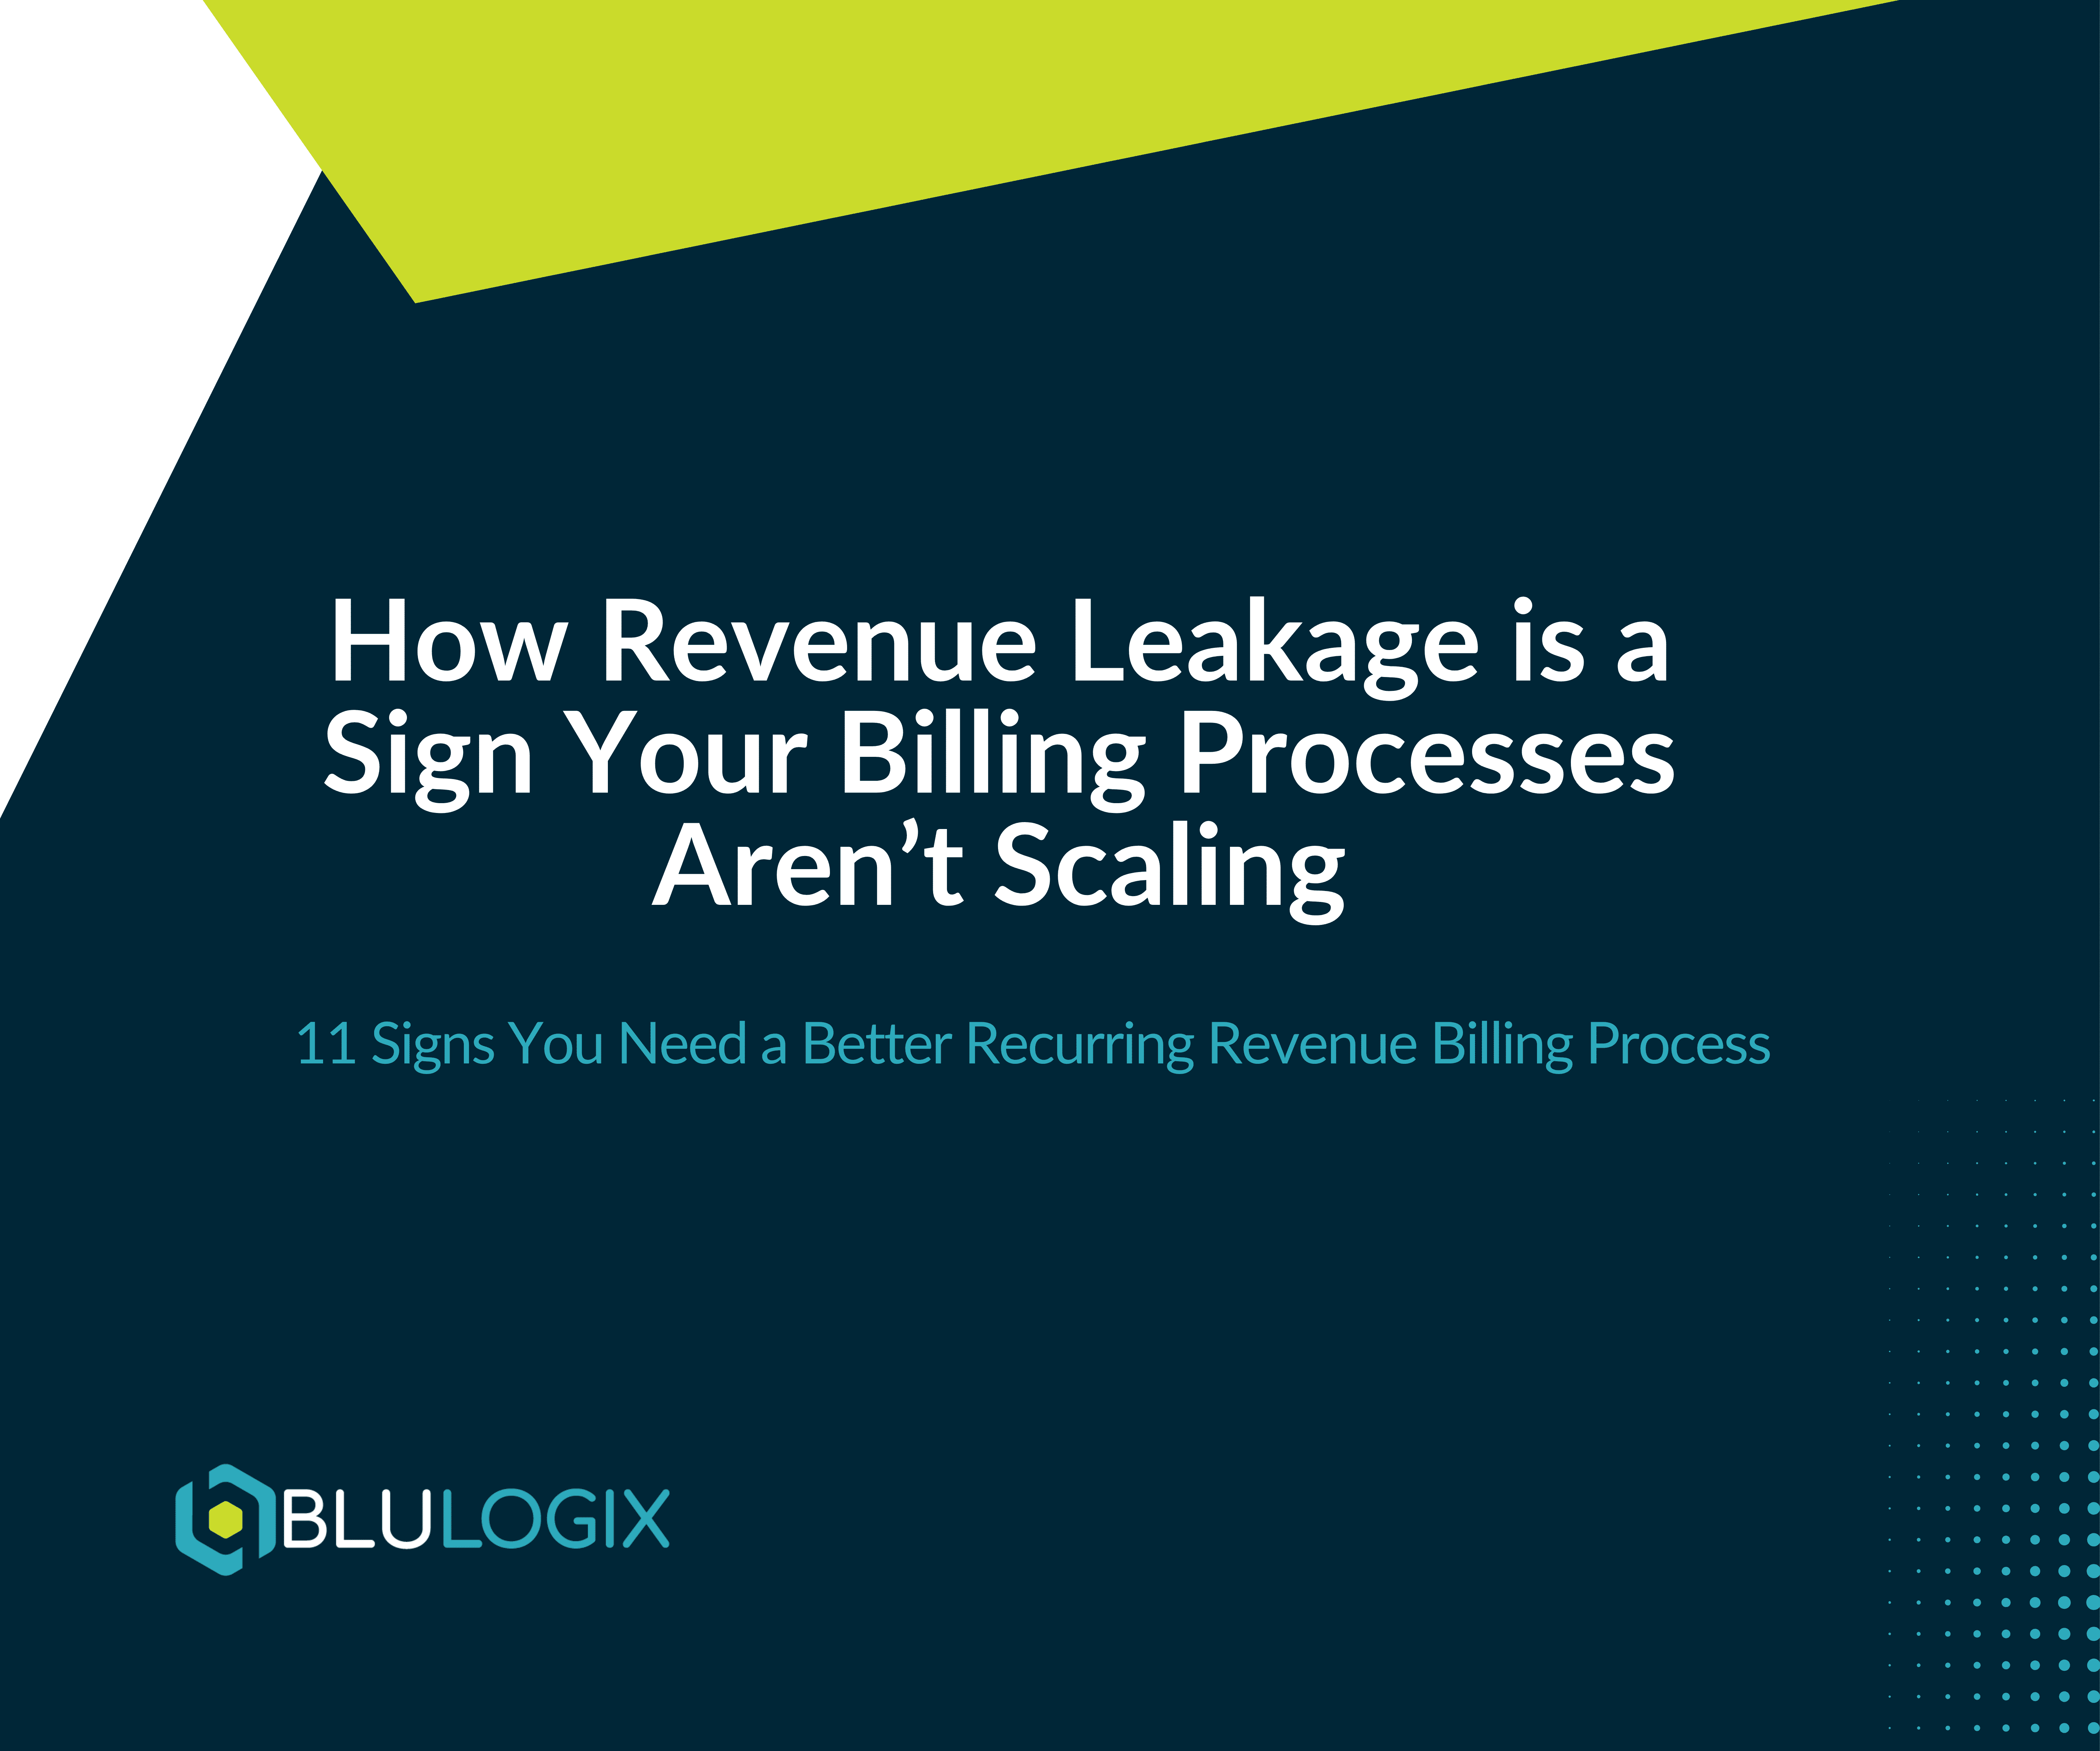 How Revenue Leakage is a Sign Your Billing Processes Aren’t Scaling